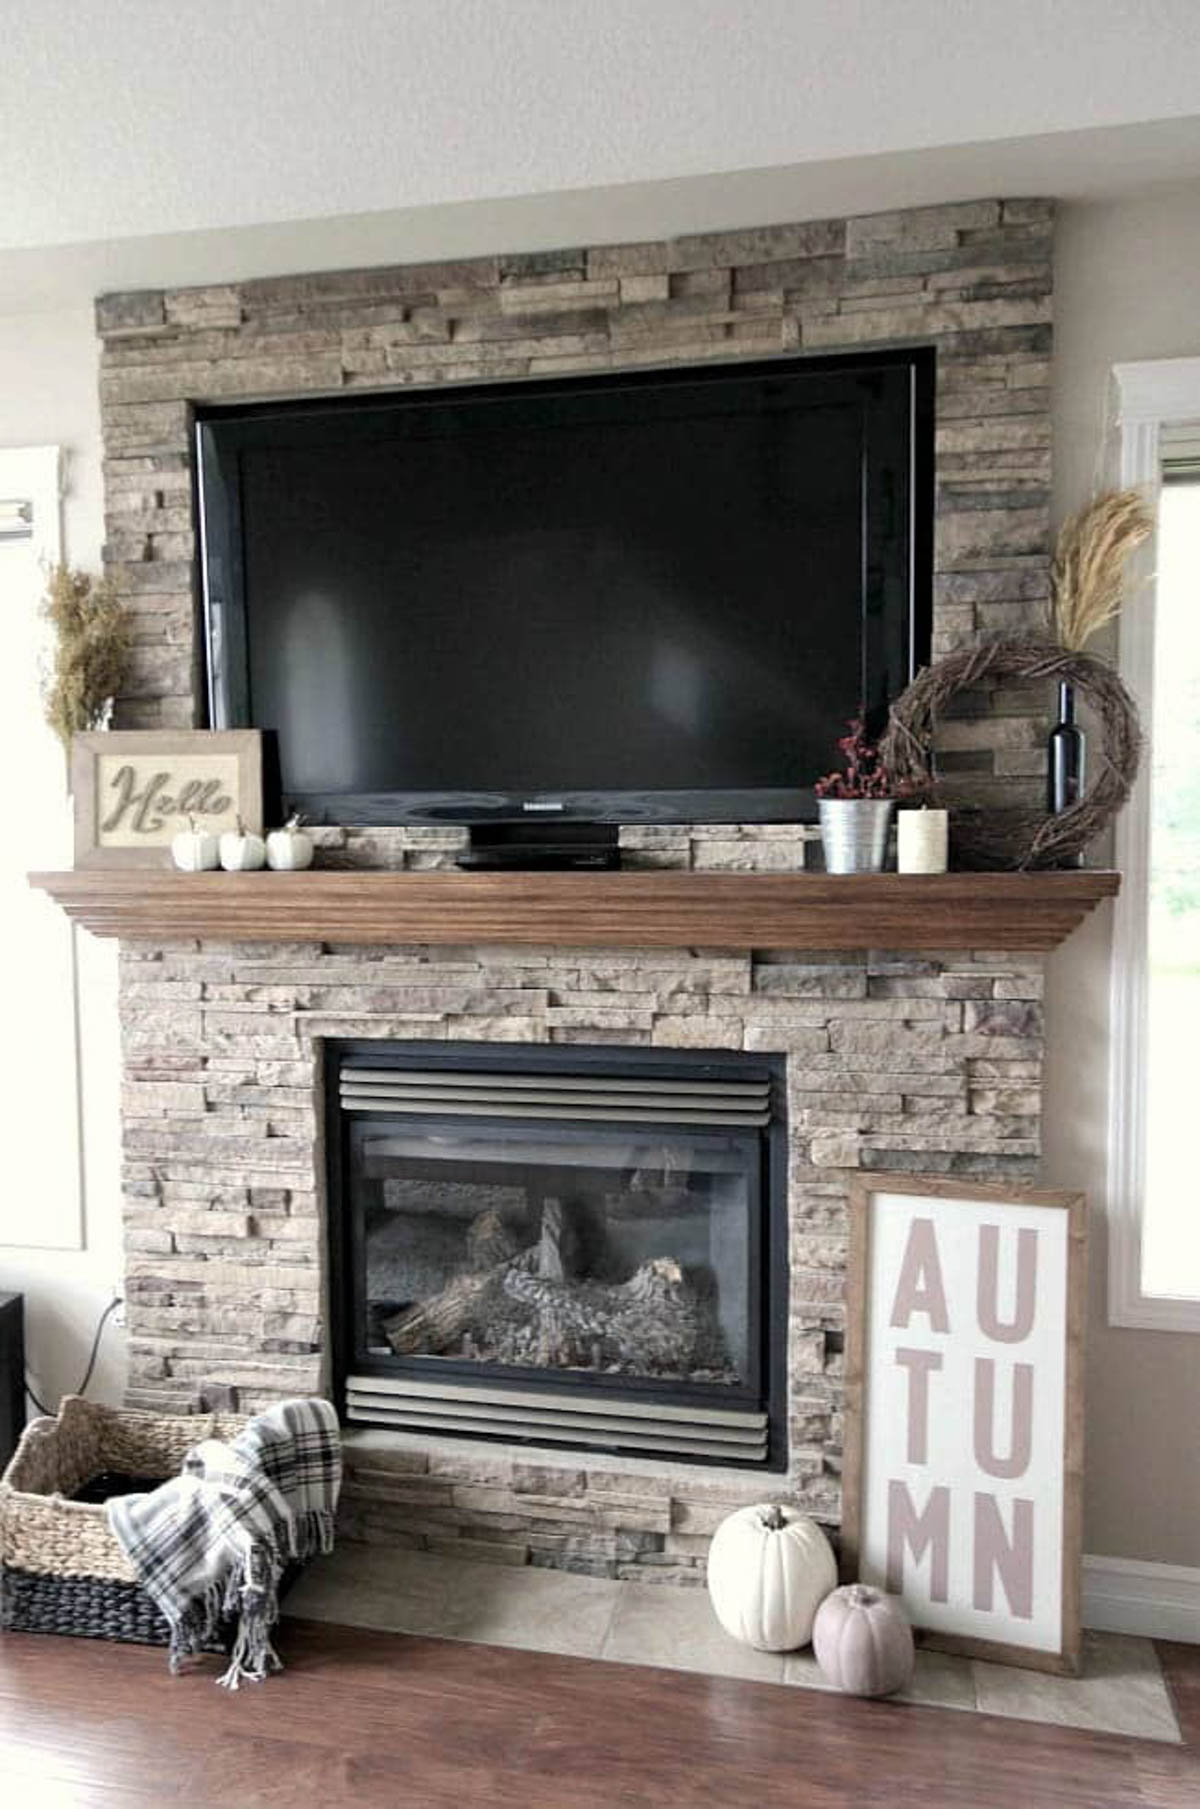 Custom wood signs decorating a fireplace